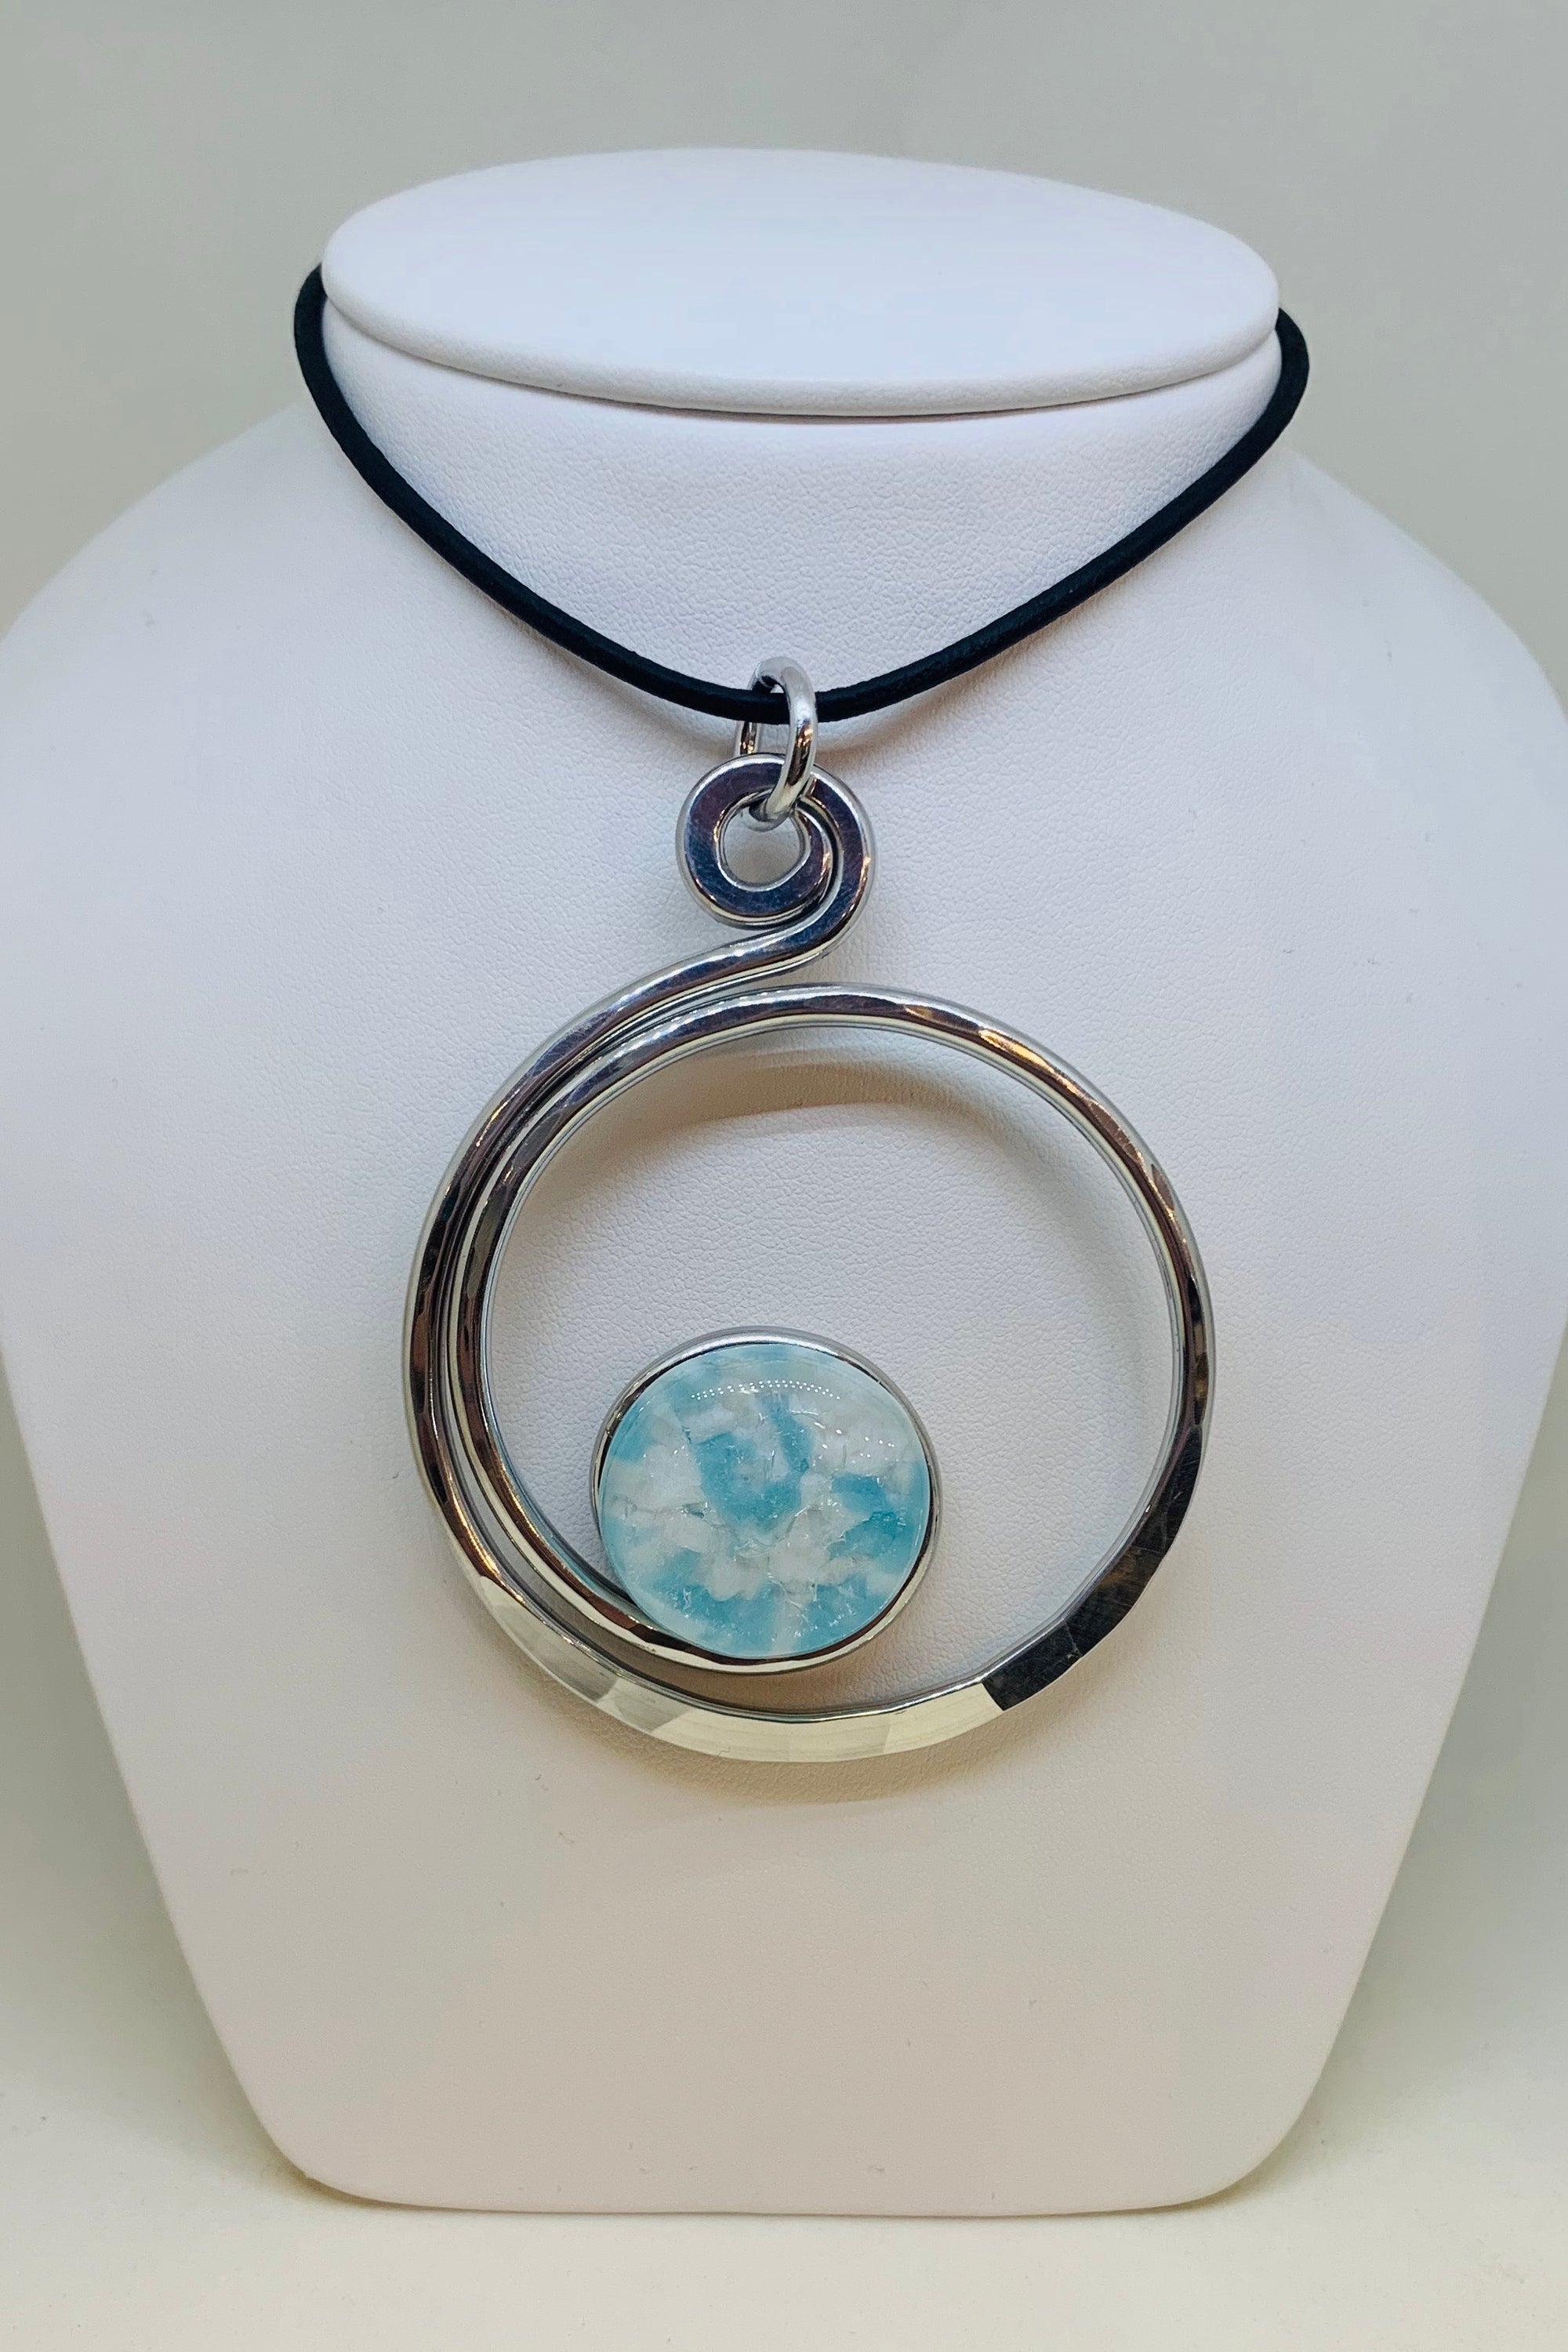 Open Curly Q Necklace w/ Blue/White Stone & Black Leather Cord